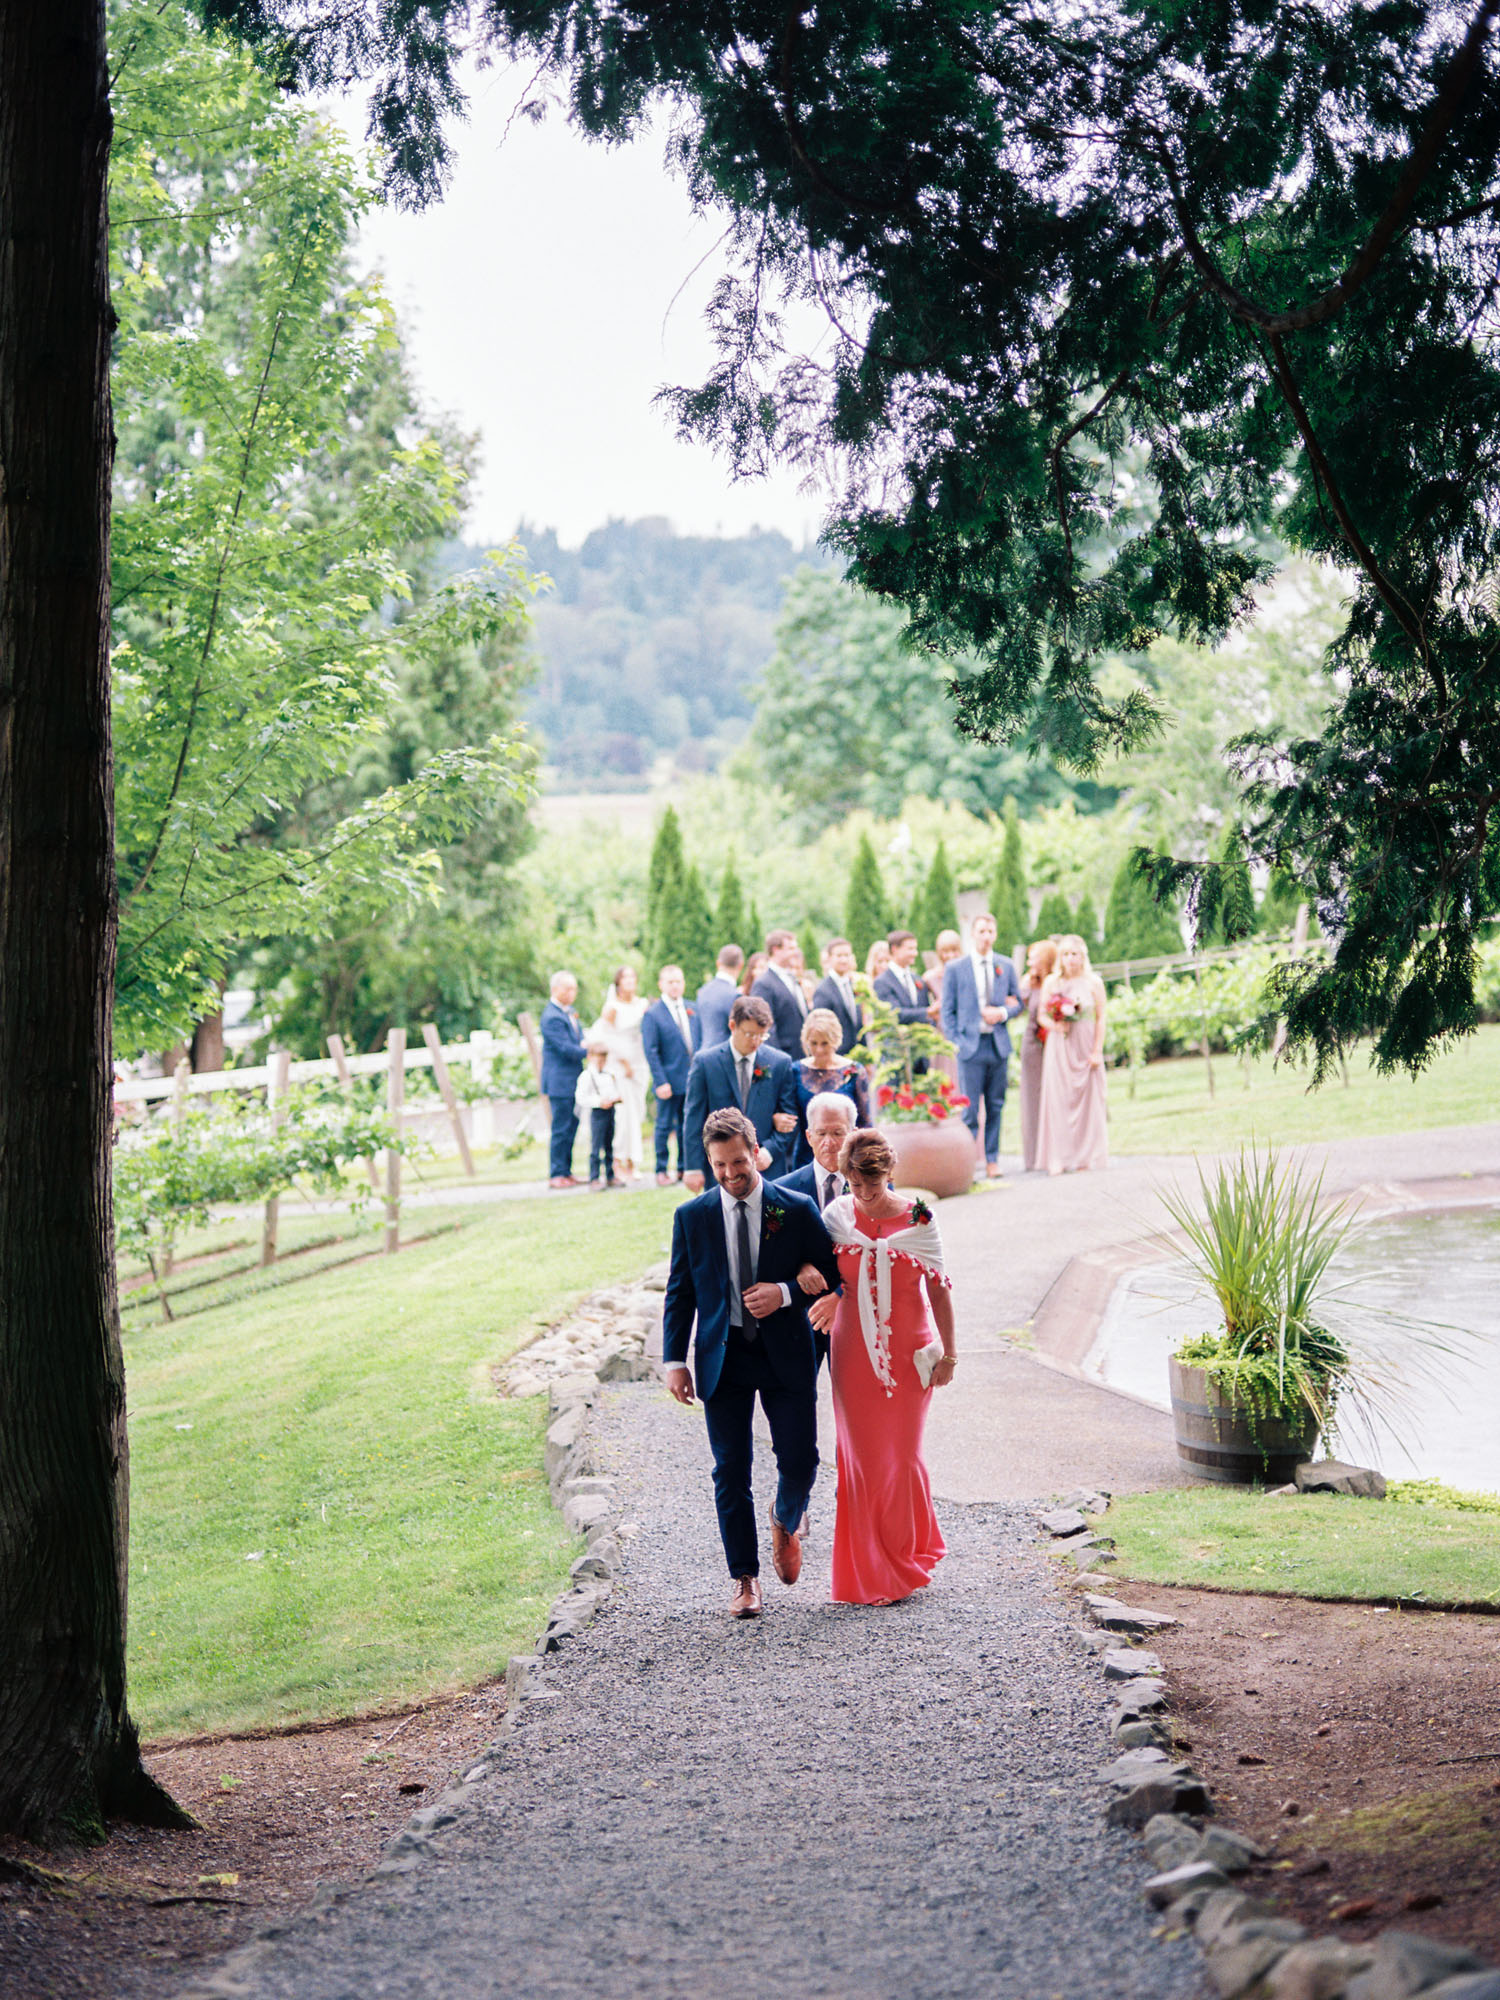 delille cellars outdoor woodinville wedding venue ceremony processional wedding photography.jpg